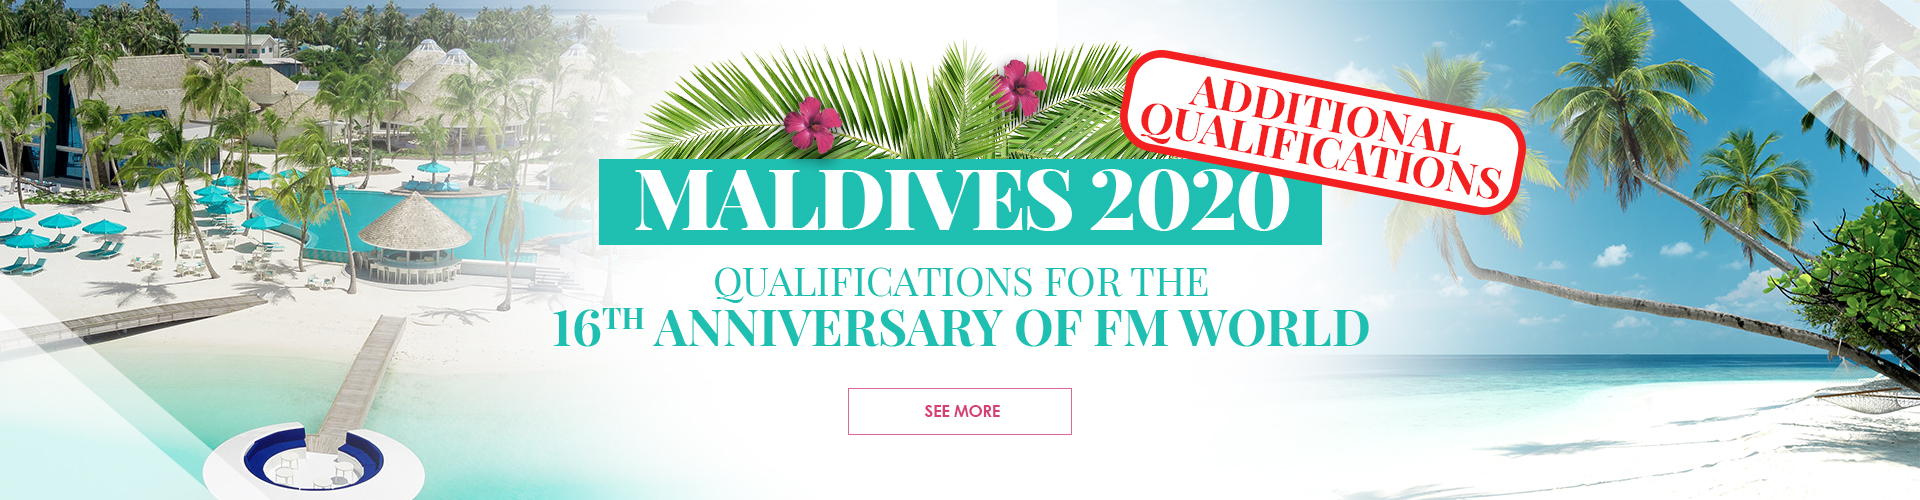 ADDITIONAL QUALIFICATIONS FOR THE 16TH ANNIVERSARY OF FM WORLD IN THE MALDIVES